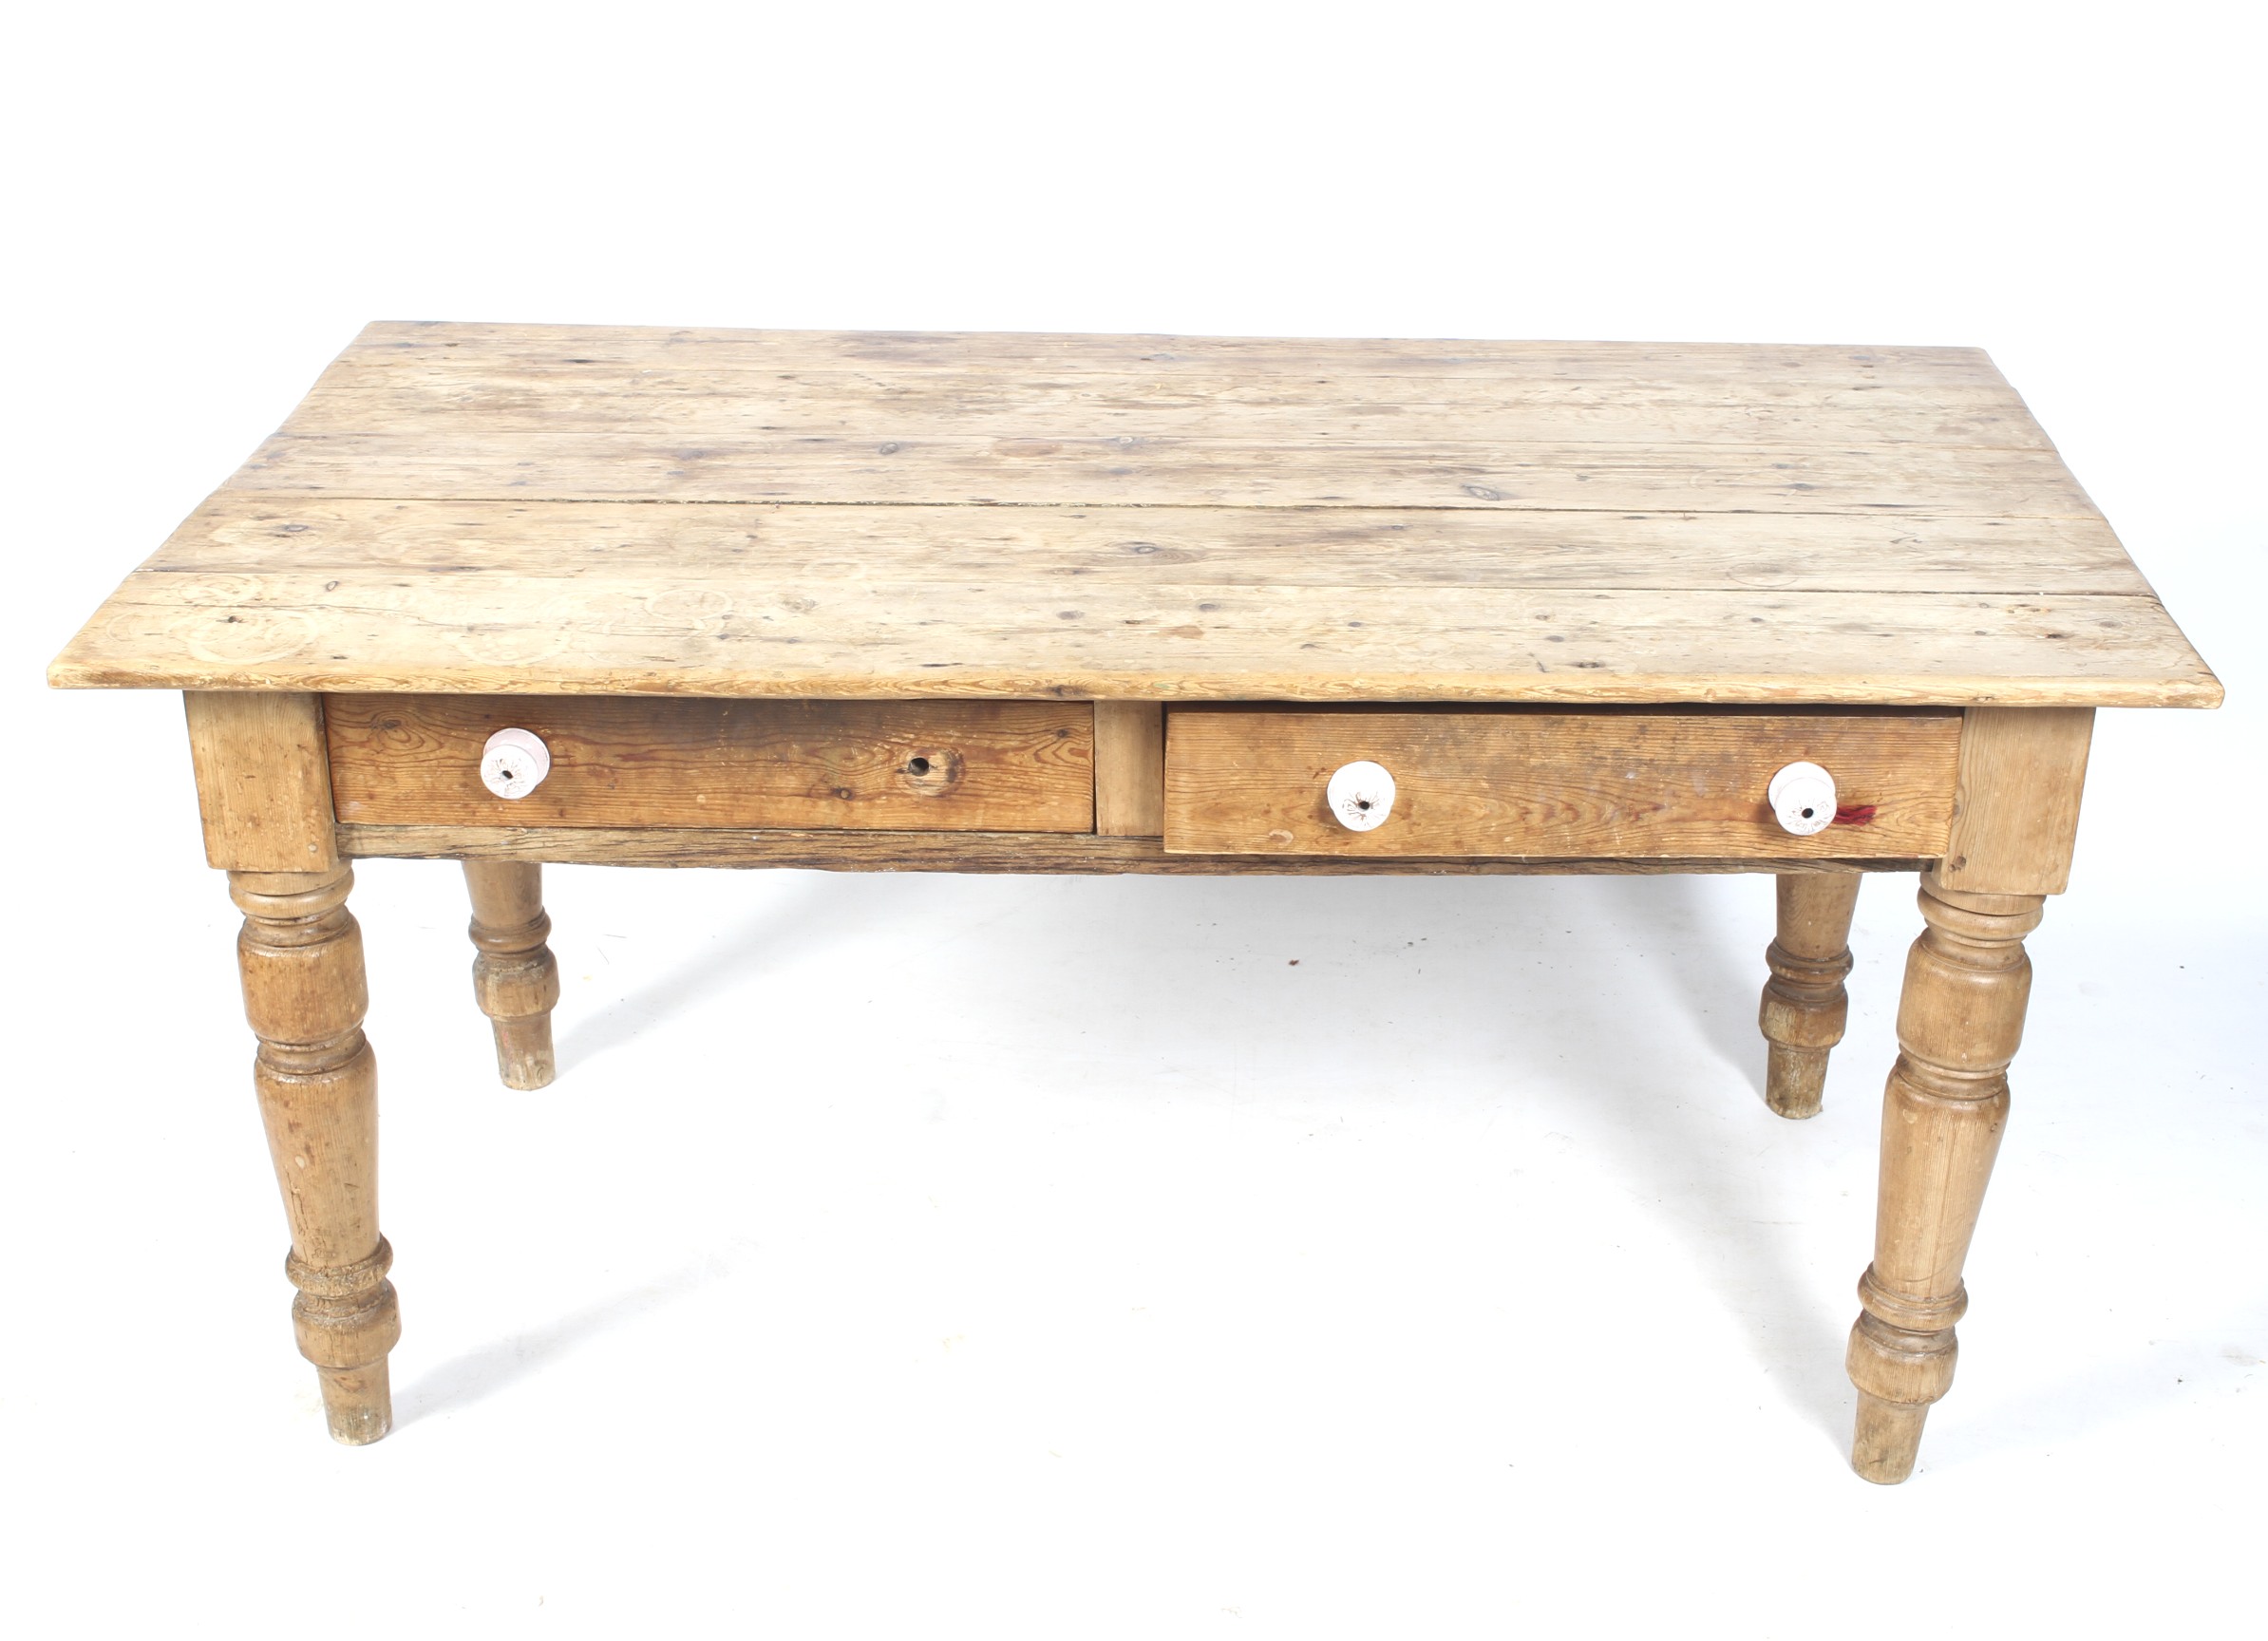 An early 20th century French pine dining table.